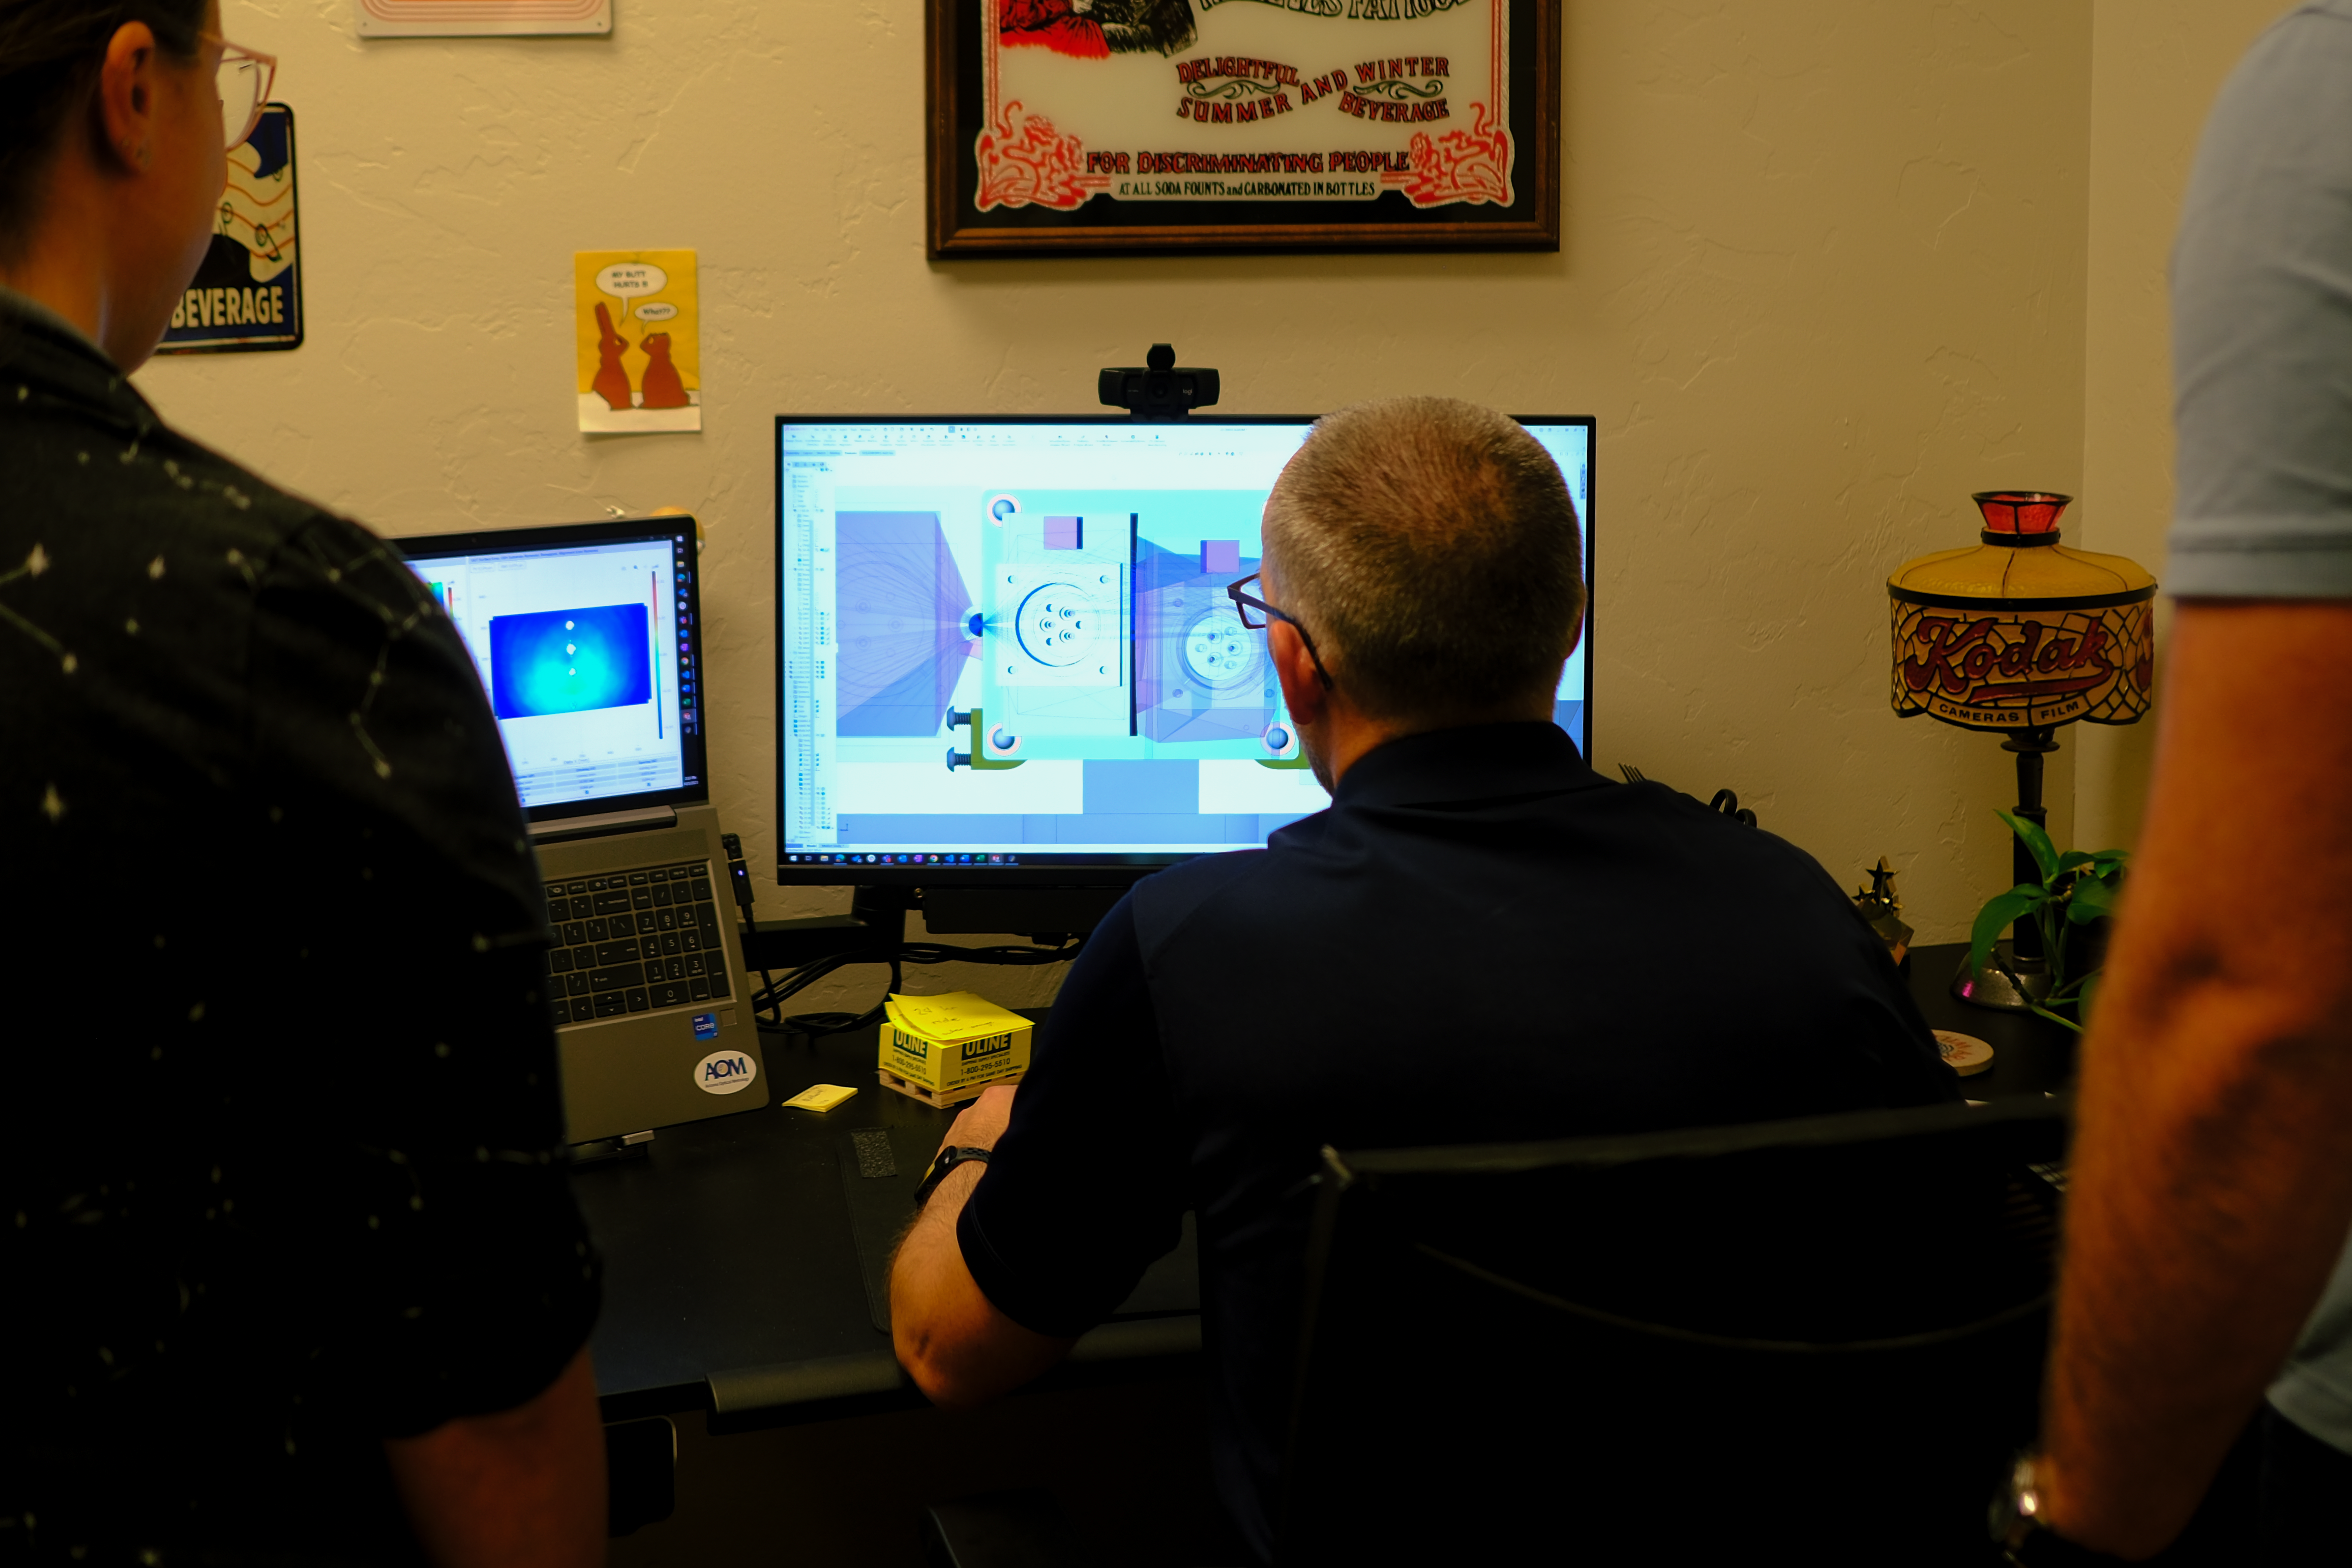 Engineers observe renderings of an optical metrology system on a computer screen